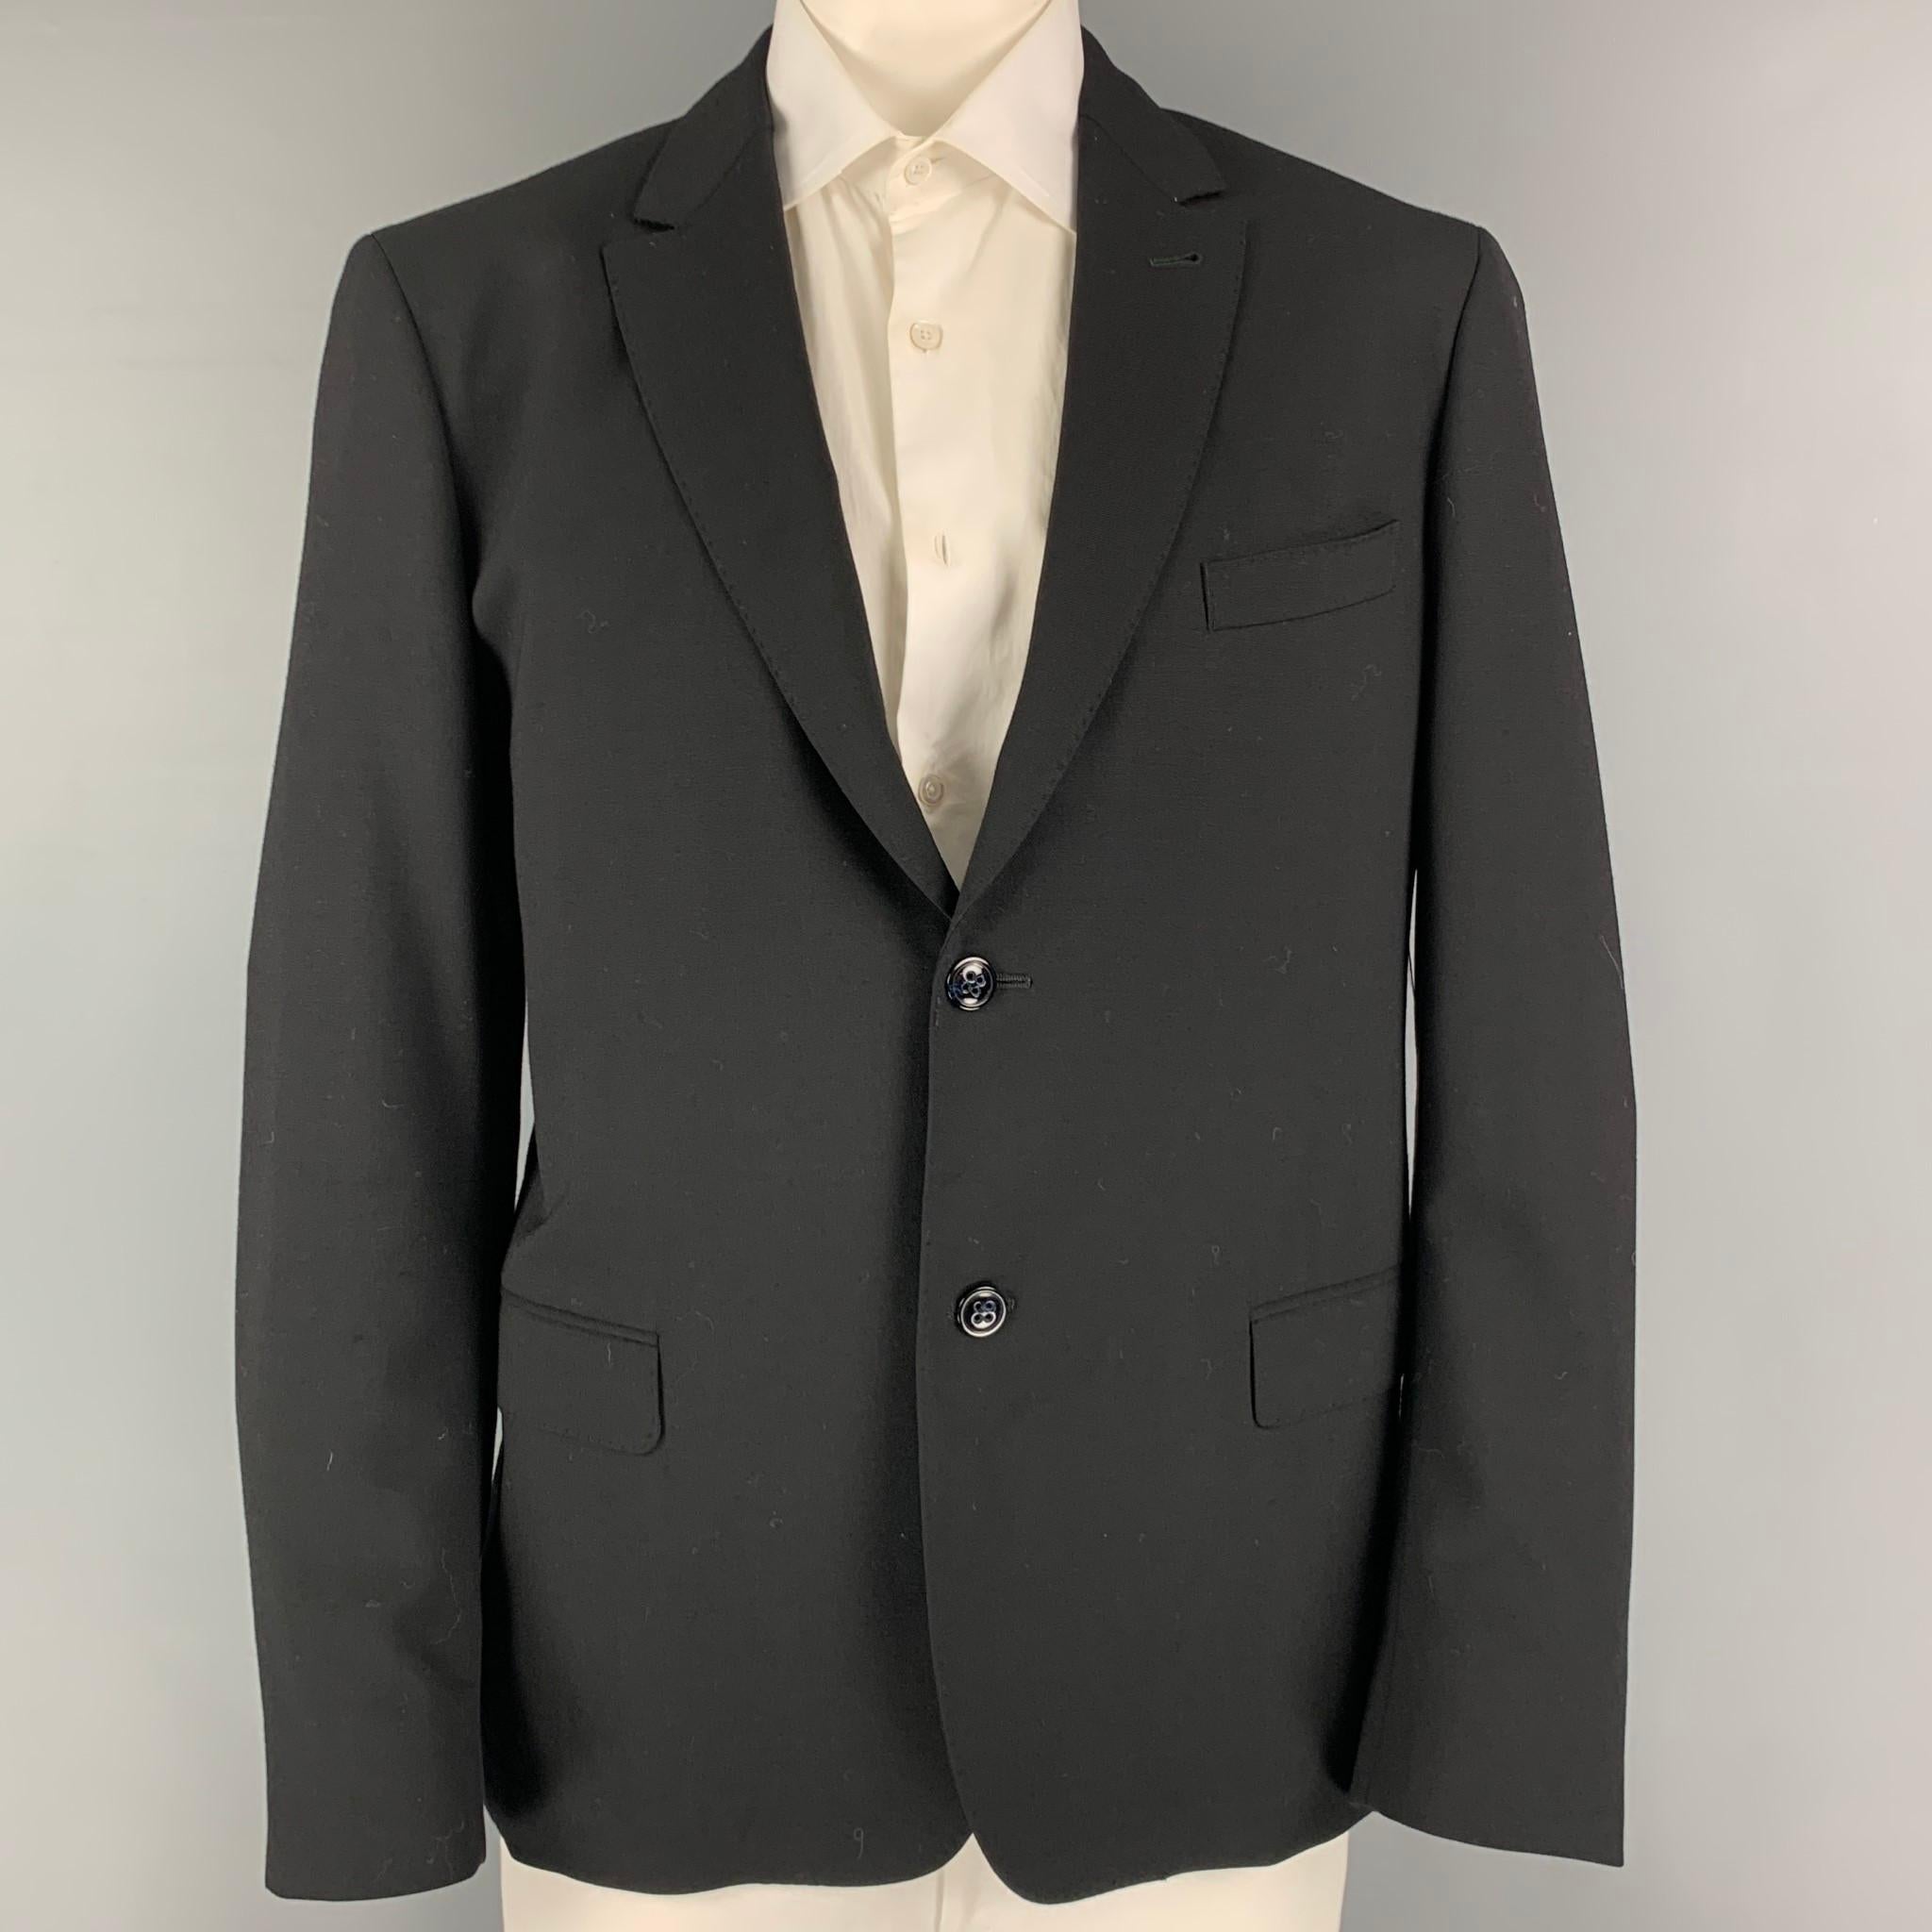 ADAM KIMMEL sport coat comes in a black wool with a full liner featuring a notch lapel, flap pockets, double back vent,and a double button closure. Made in Italy.

Excellent Pre-Owned Condition.
Marked: XL

Measurements:

Shoulder: 20 in.
Chest: 42